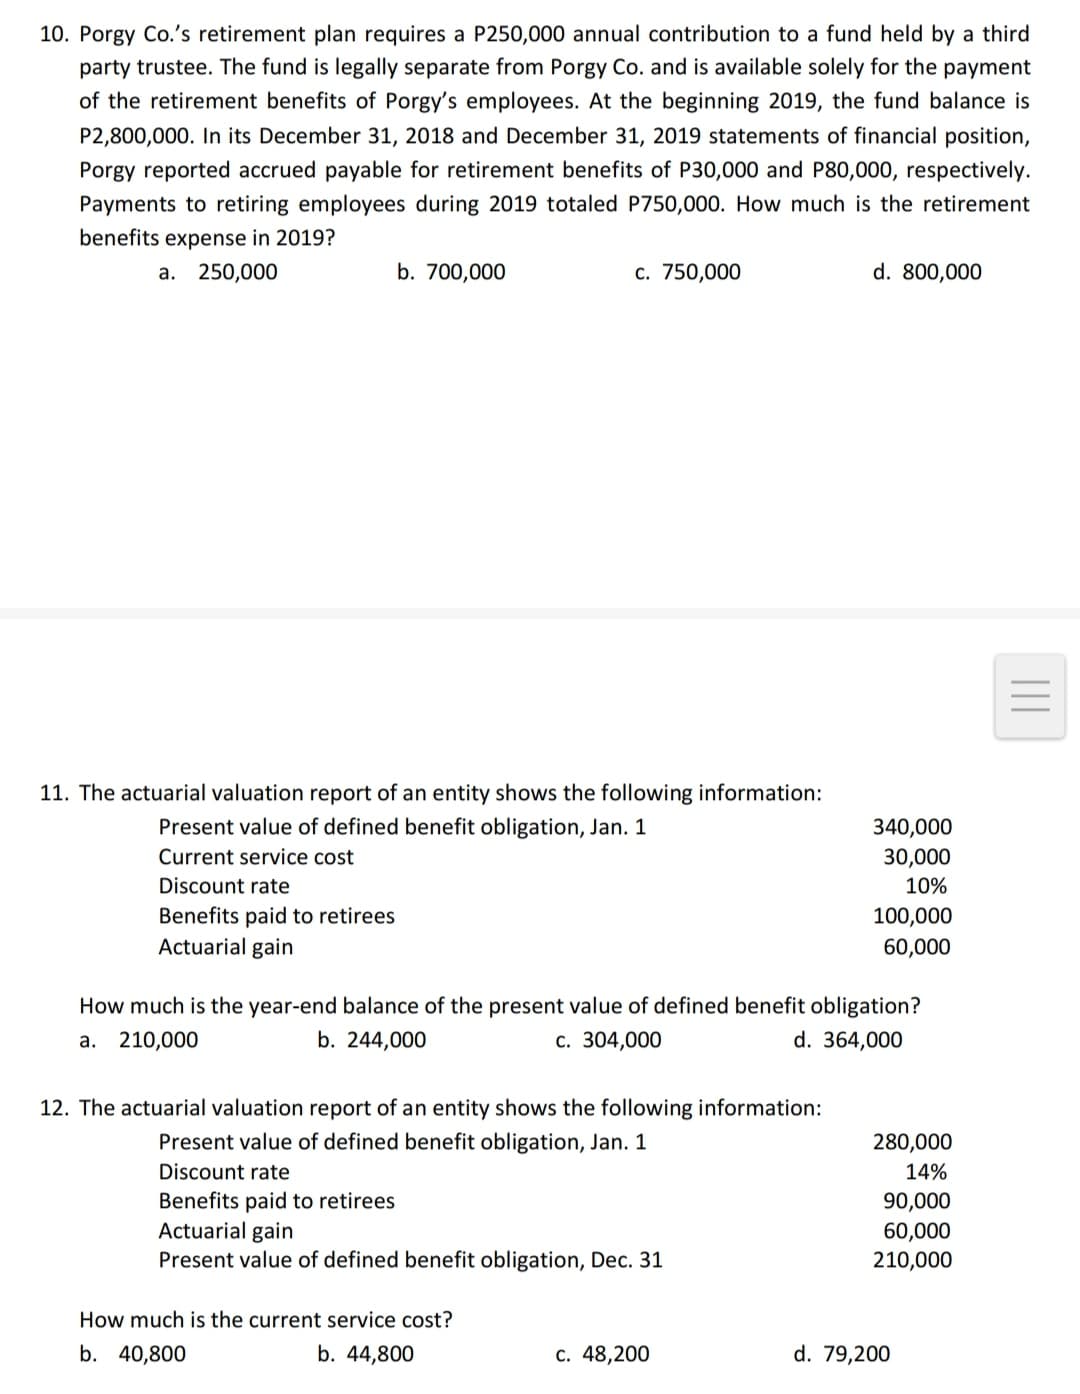 10. Porgy Co.'s retirement plan requires a P250,000 annual contribution to a fund held by a third
party trustee. The fund is legally separate from Porgy Co. and is available solely for the payment
of the retirement benefits of Porgy's employees. At the beginning 2019, the fund balance is
P2,800,000. In its December 31, 2018 and December 31, 2019 statements of financial position,
Porgy reported accrued payable for retirement benefits of P30,000 and P80,000, respectively.
Payments to retiring employees during 2019 totaled P750,000. How much is the retirement
benefits expense in 2019?
a. 250,000
b. 700,000
с. 750,000
d. 800,000
11. The actuarial valuation report of an entity shows the following information:
Present value of defined benefit obligation, Jan. 1
340,000
30,000
Current service cost
Discount rate
10%
Benefits paid to retirees
Actuarial gain
100,000
60,000
How much is the year-end balance of the present value of defined benefit obligation?
d. 364,000
а. 210,000
b. 244,000
c. 304,000
12. The actuarial valuation report of an entity shows the following information:
Present value of defined benefit obligation, Jan. 1
280,000
Discount rate
14%
Benefits paid to retirees
Actuarial gain
Present value of defined benefit obligation, Dec. 31
90,000
60,000
210,000
How much is the current service cost?
b. 40,800
b. 44,800
c. 48,200
d. 79,200
